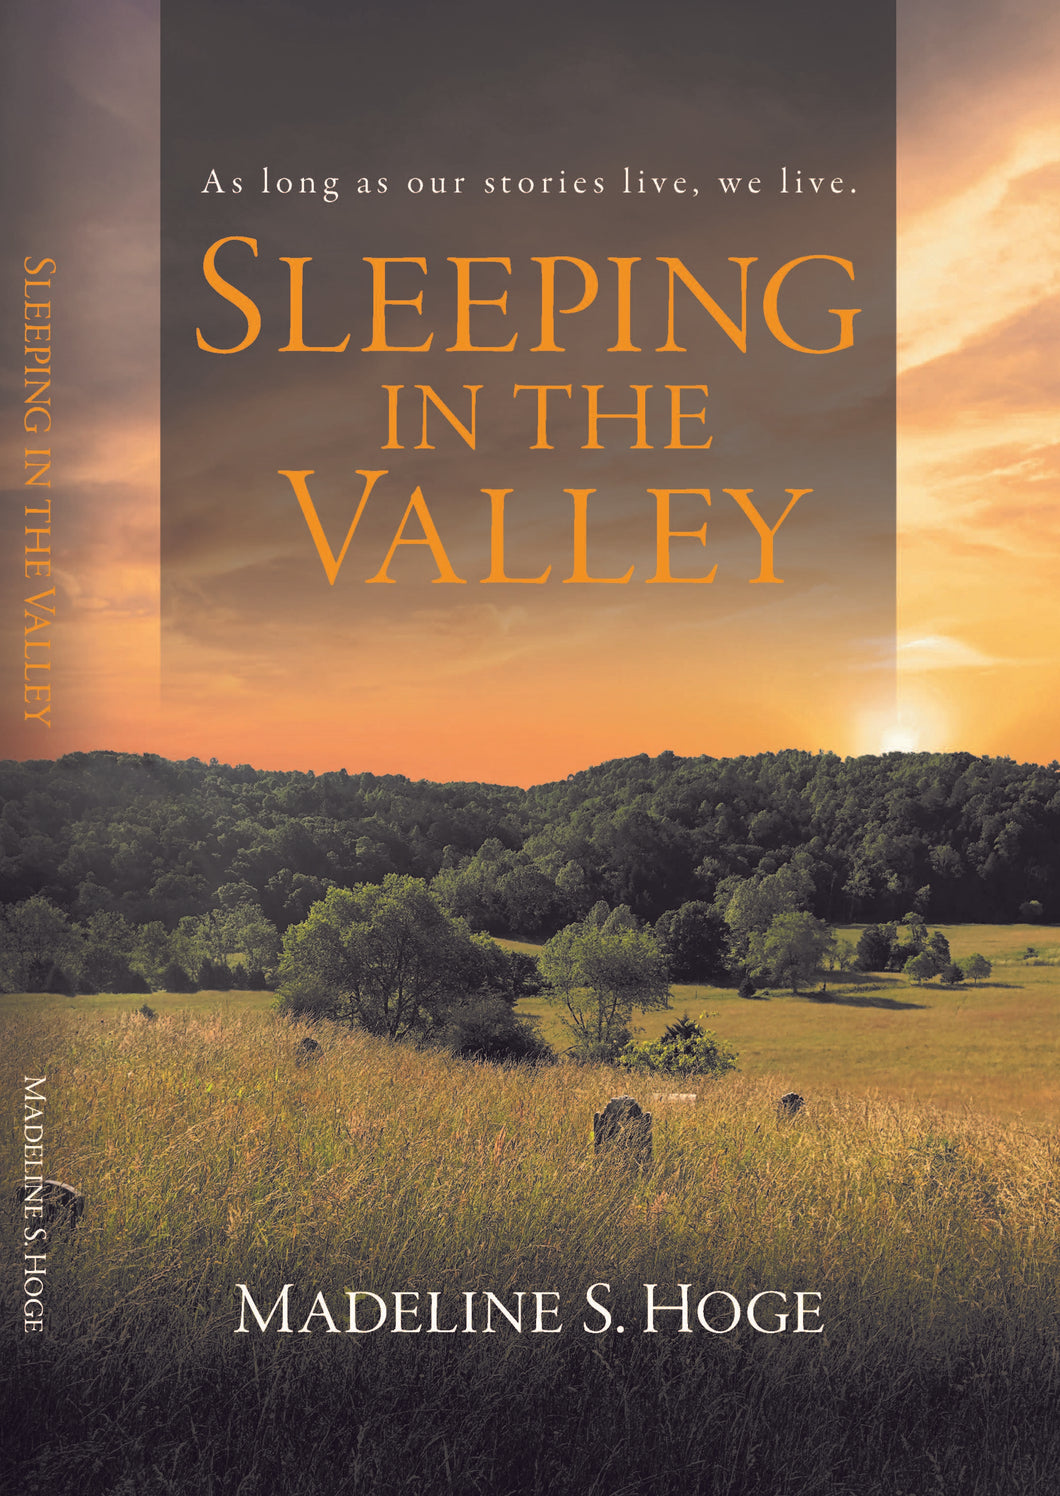 Sleeping in the Valley: As Long As Our Stories Live, We Live